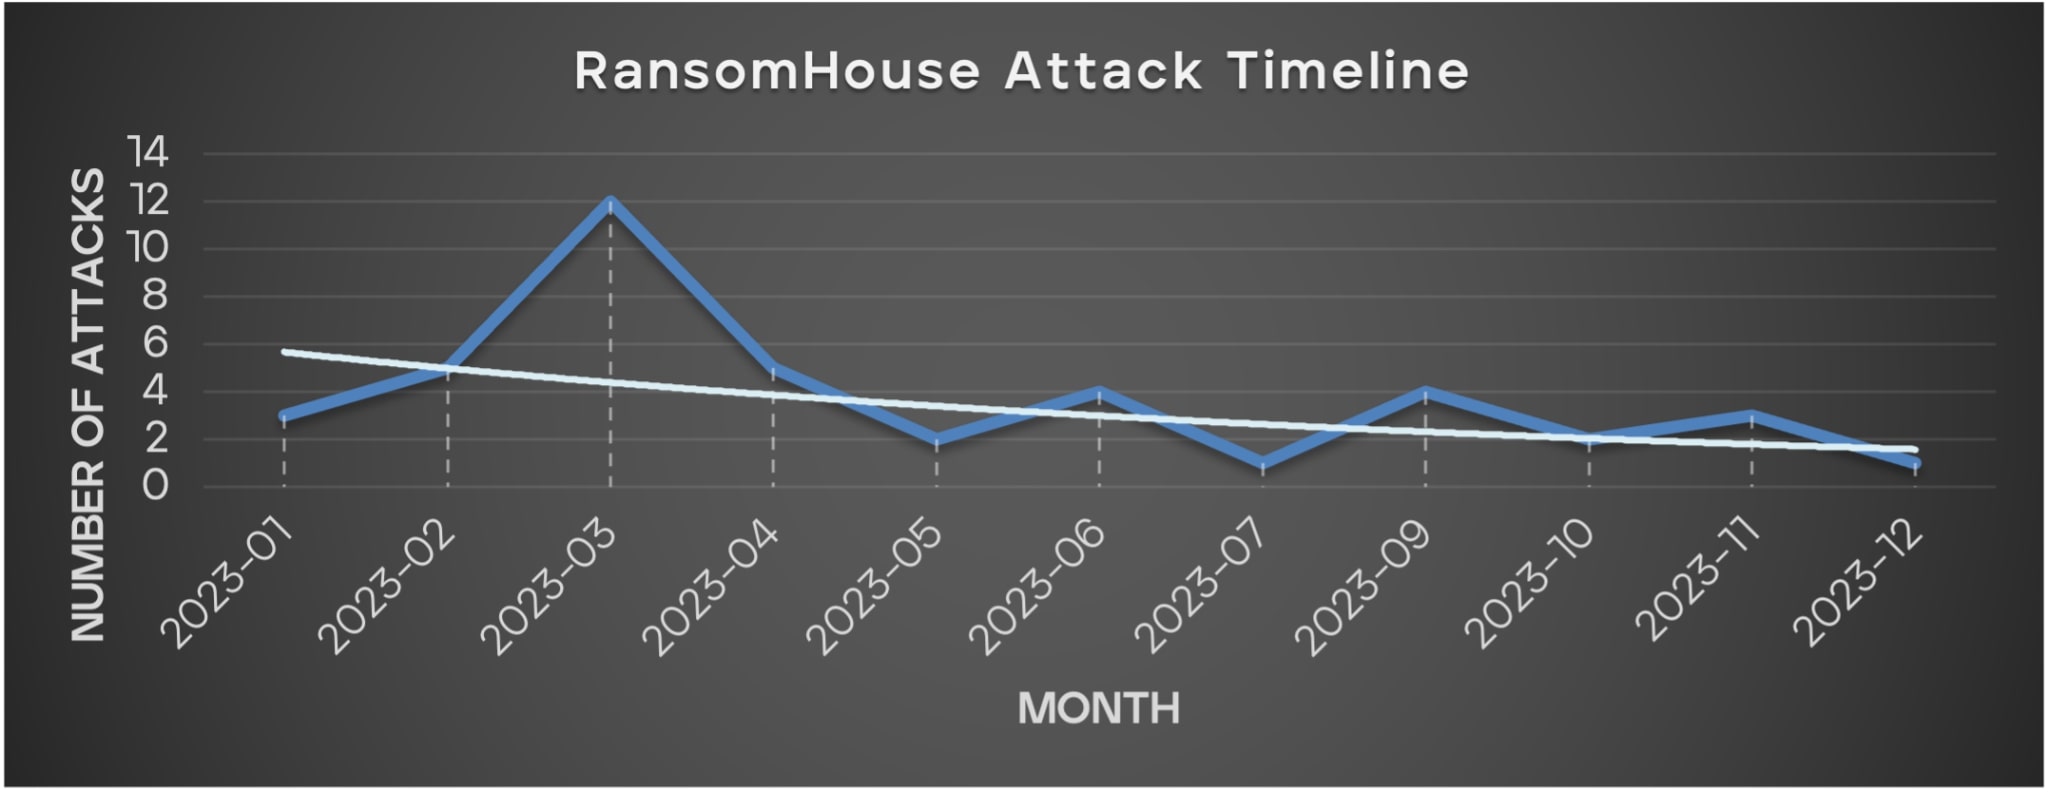  Figure 9 - The attack timeline of RansomHous